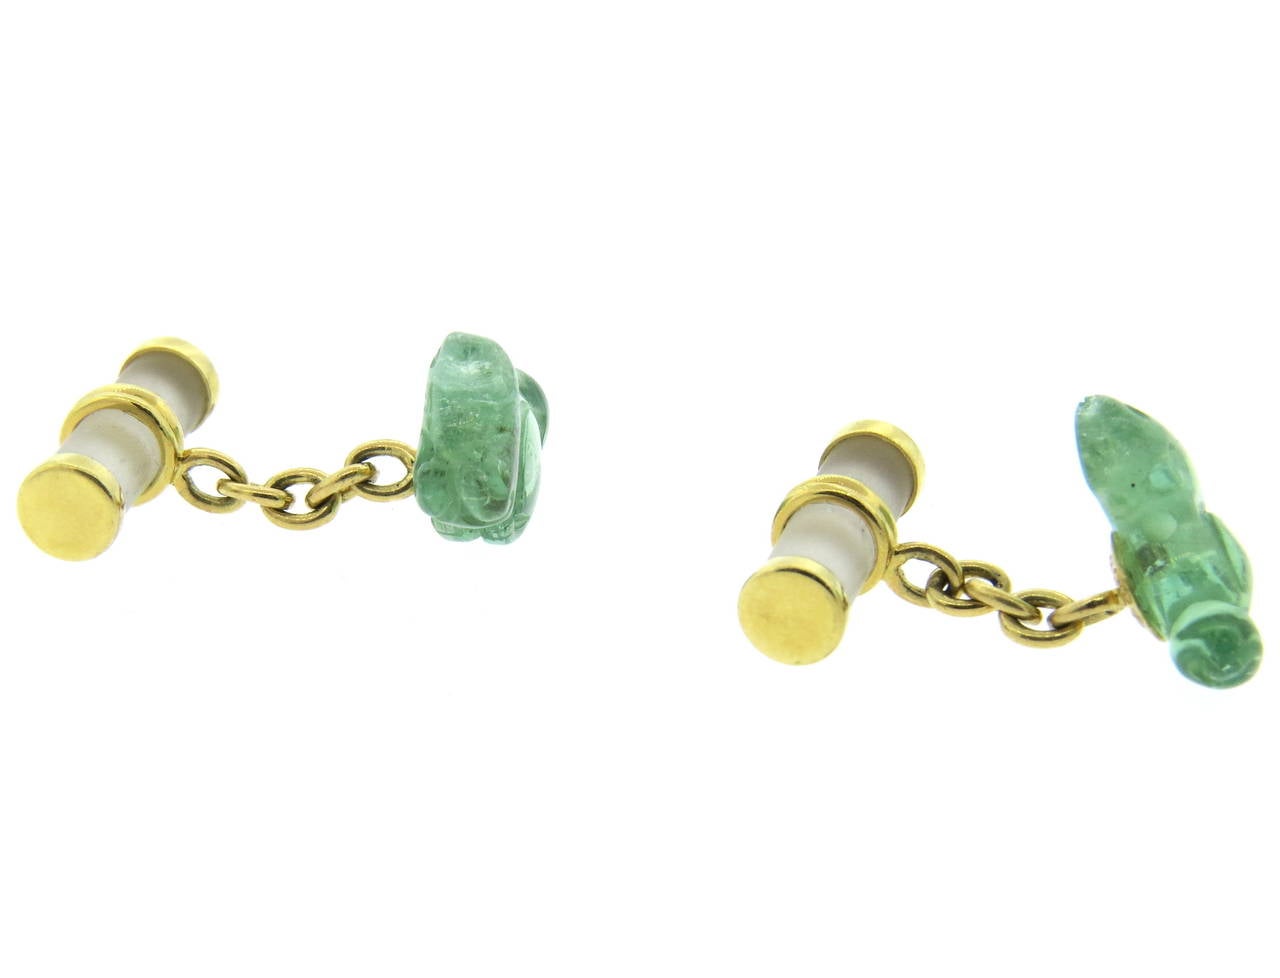 A pair of 18k yellow gold cufflinks set with crystal and carved green gemstones depicting squirrels.  The cufflinks measure 16.6mm x 10mm and 18.8mm x 7mm.  They weigh 7.9 grams.